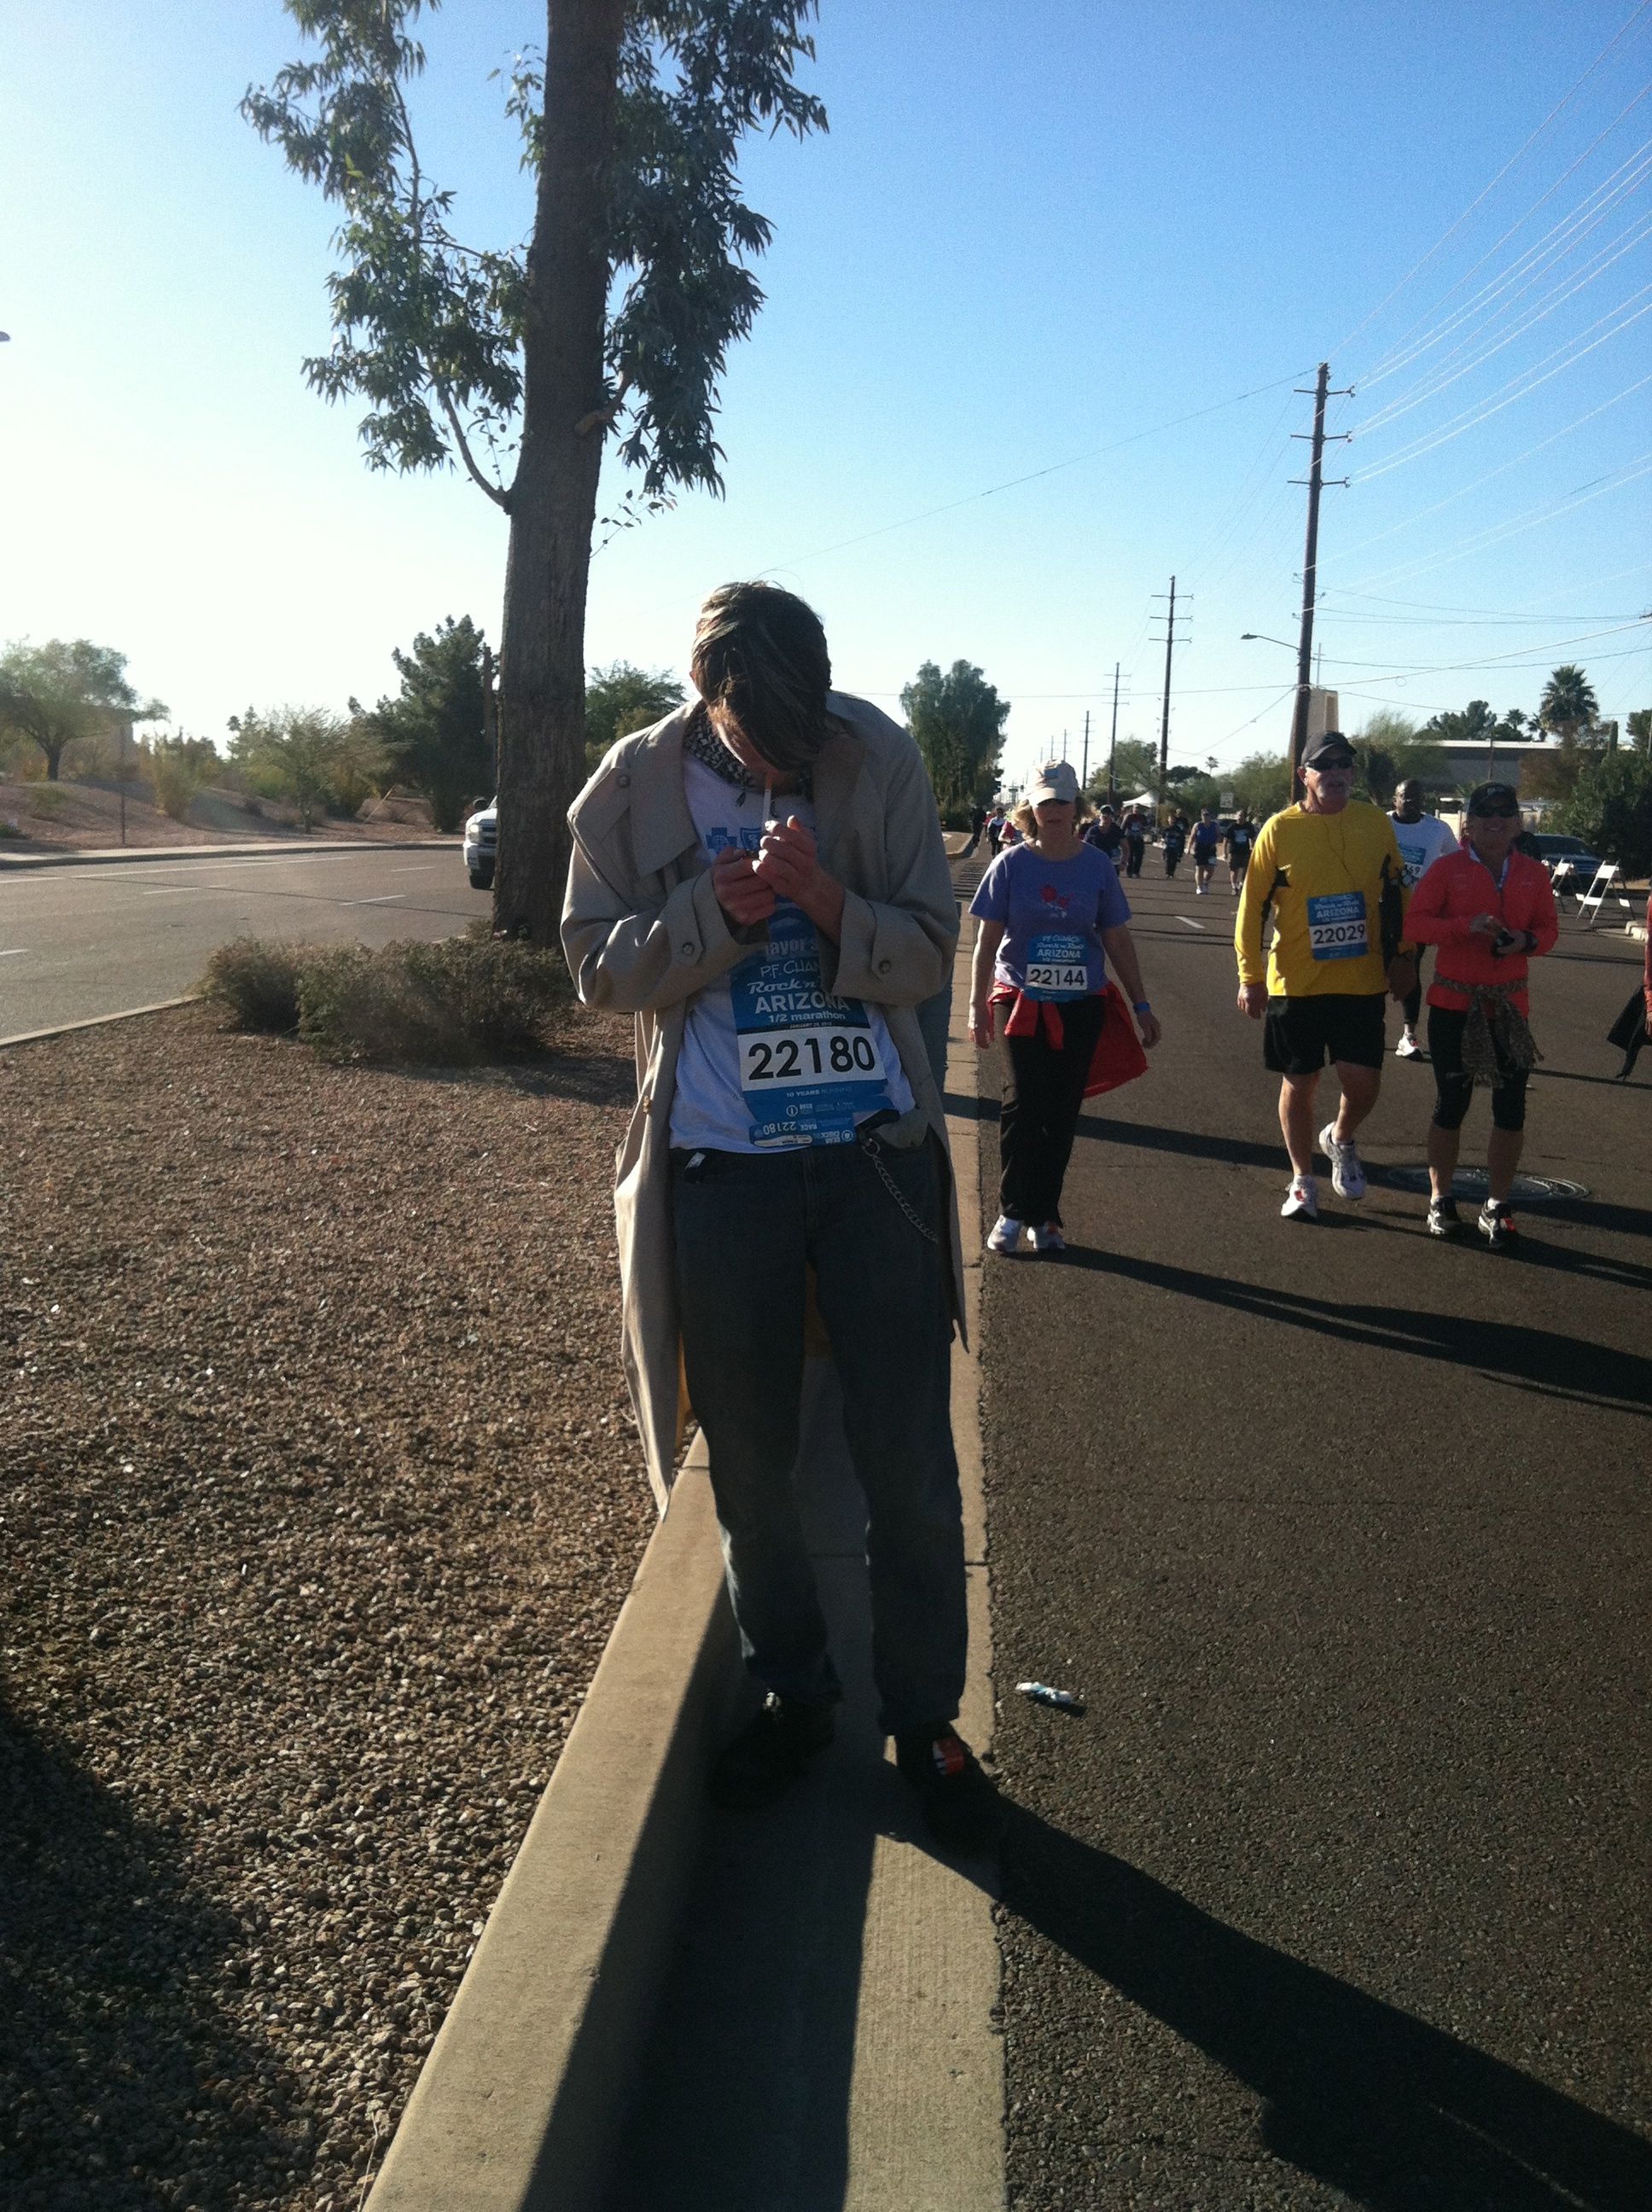 What?! Yes, indeed. This is a smoking half marathoner (during the race!). 